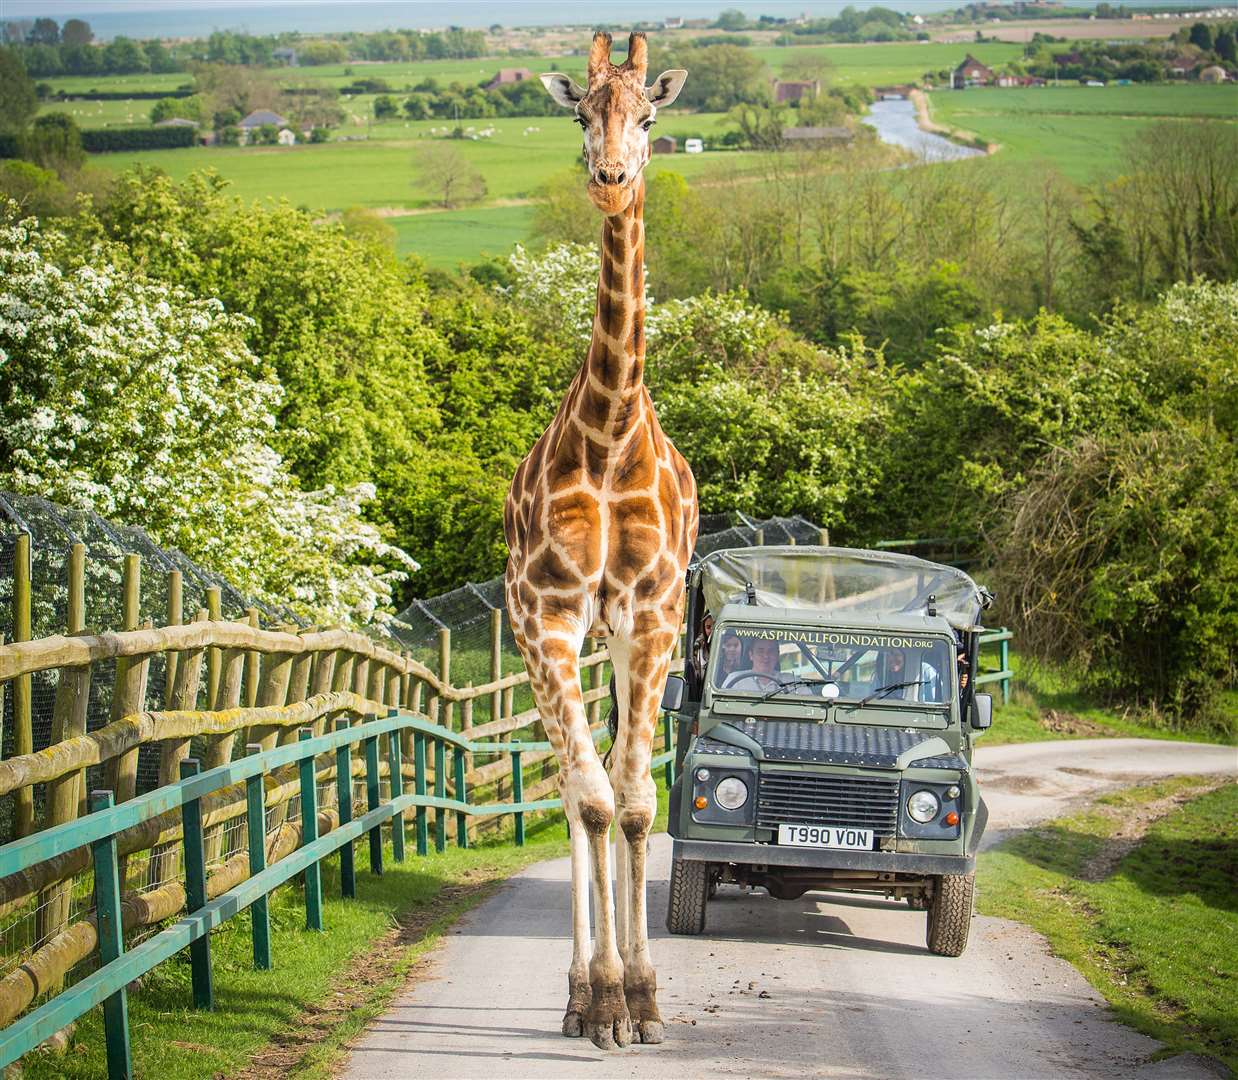 Meet some of the world's most amazing animals in the safari park. Picture: Port Lympne Reserve